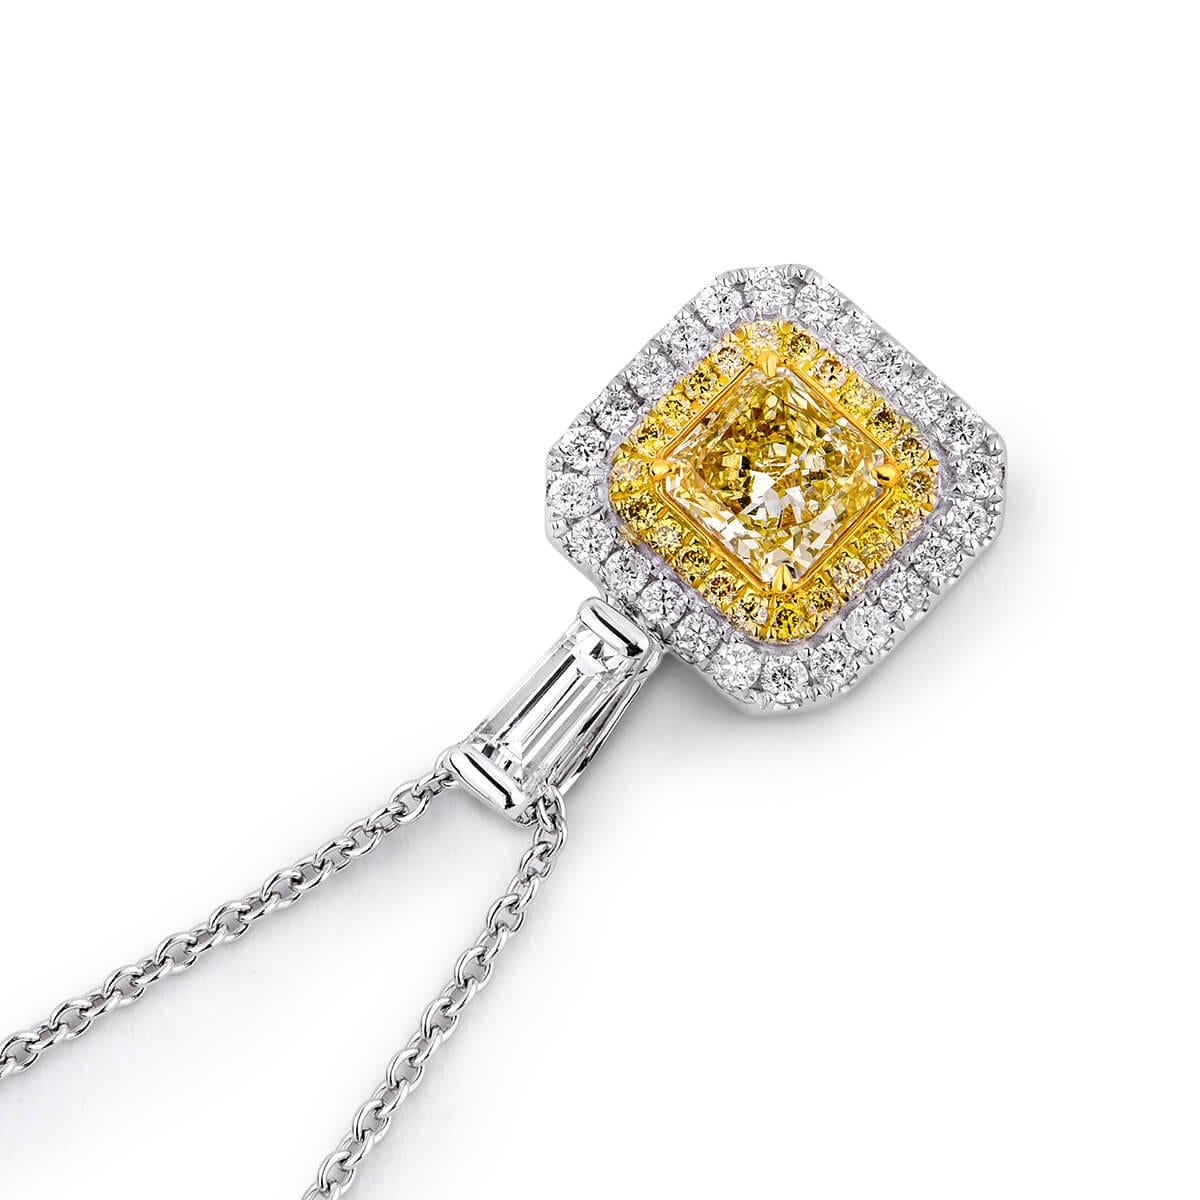 This sophisticated piece is made up of a natural untreated fancy yellow 0.57 carat diamond surrounded by smaller white and yellow diamonds making up a total carat weight of 1.11 carat. This piece has been expertly crafted using 18 karat white gold.